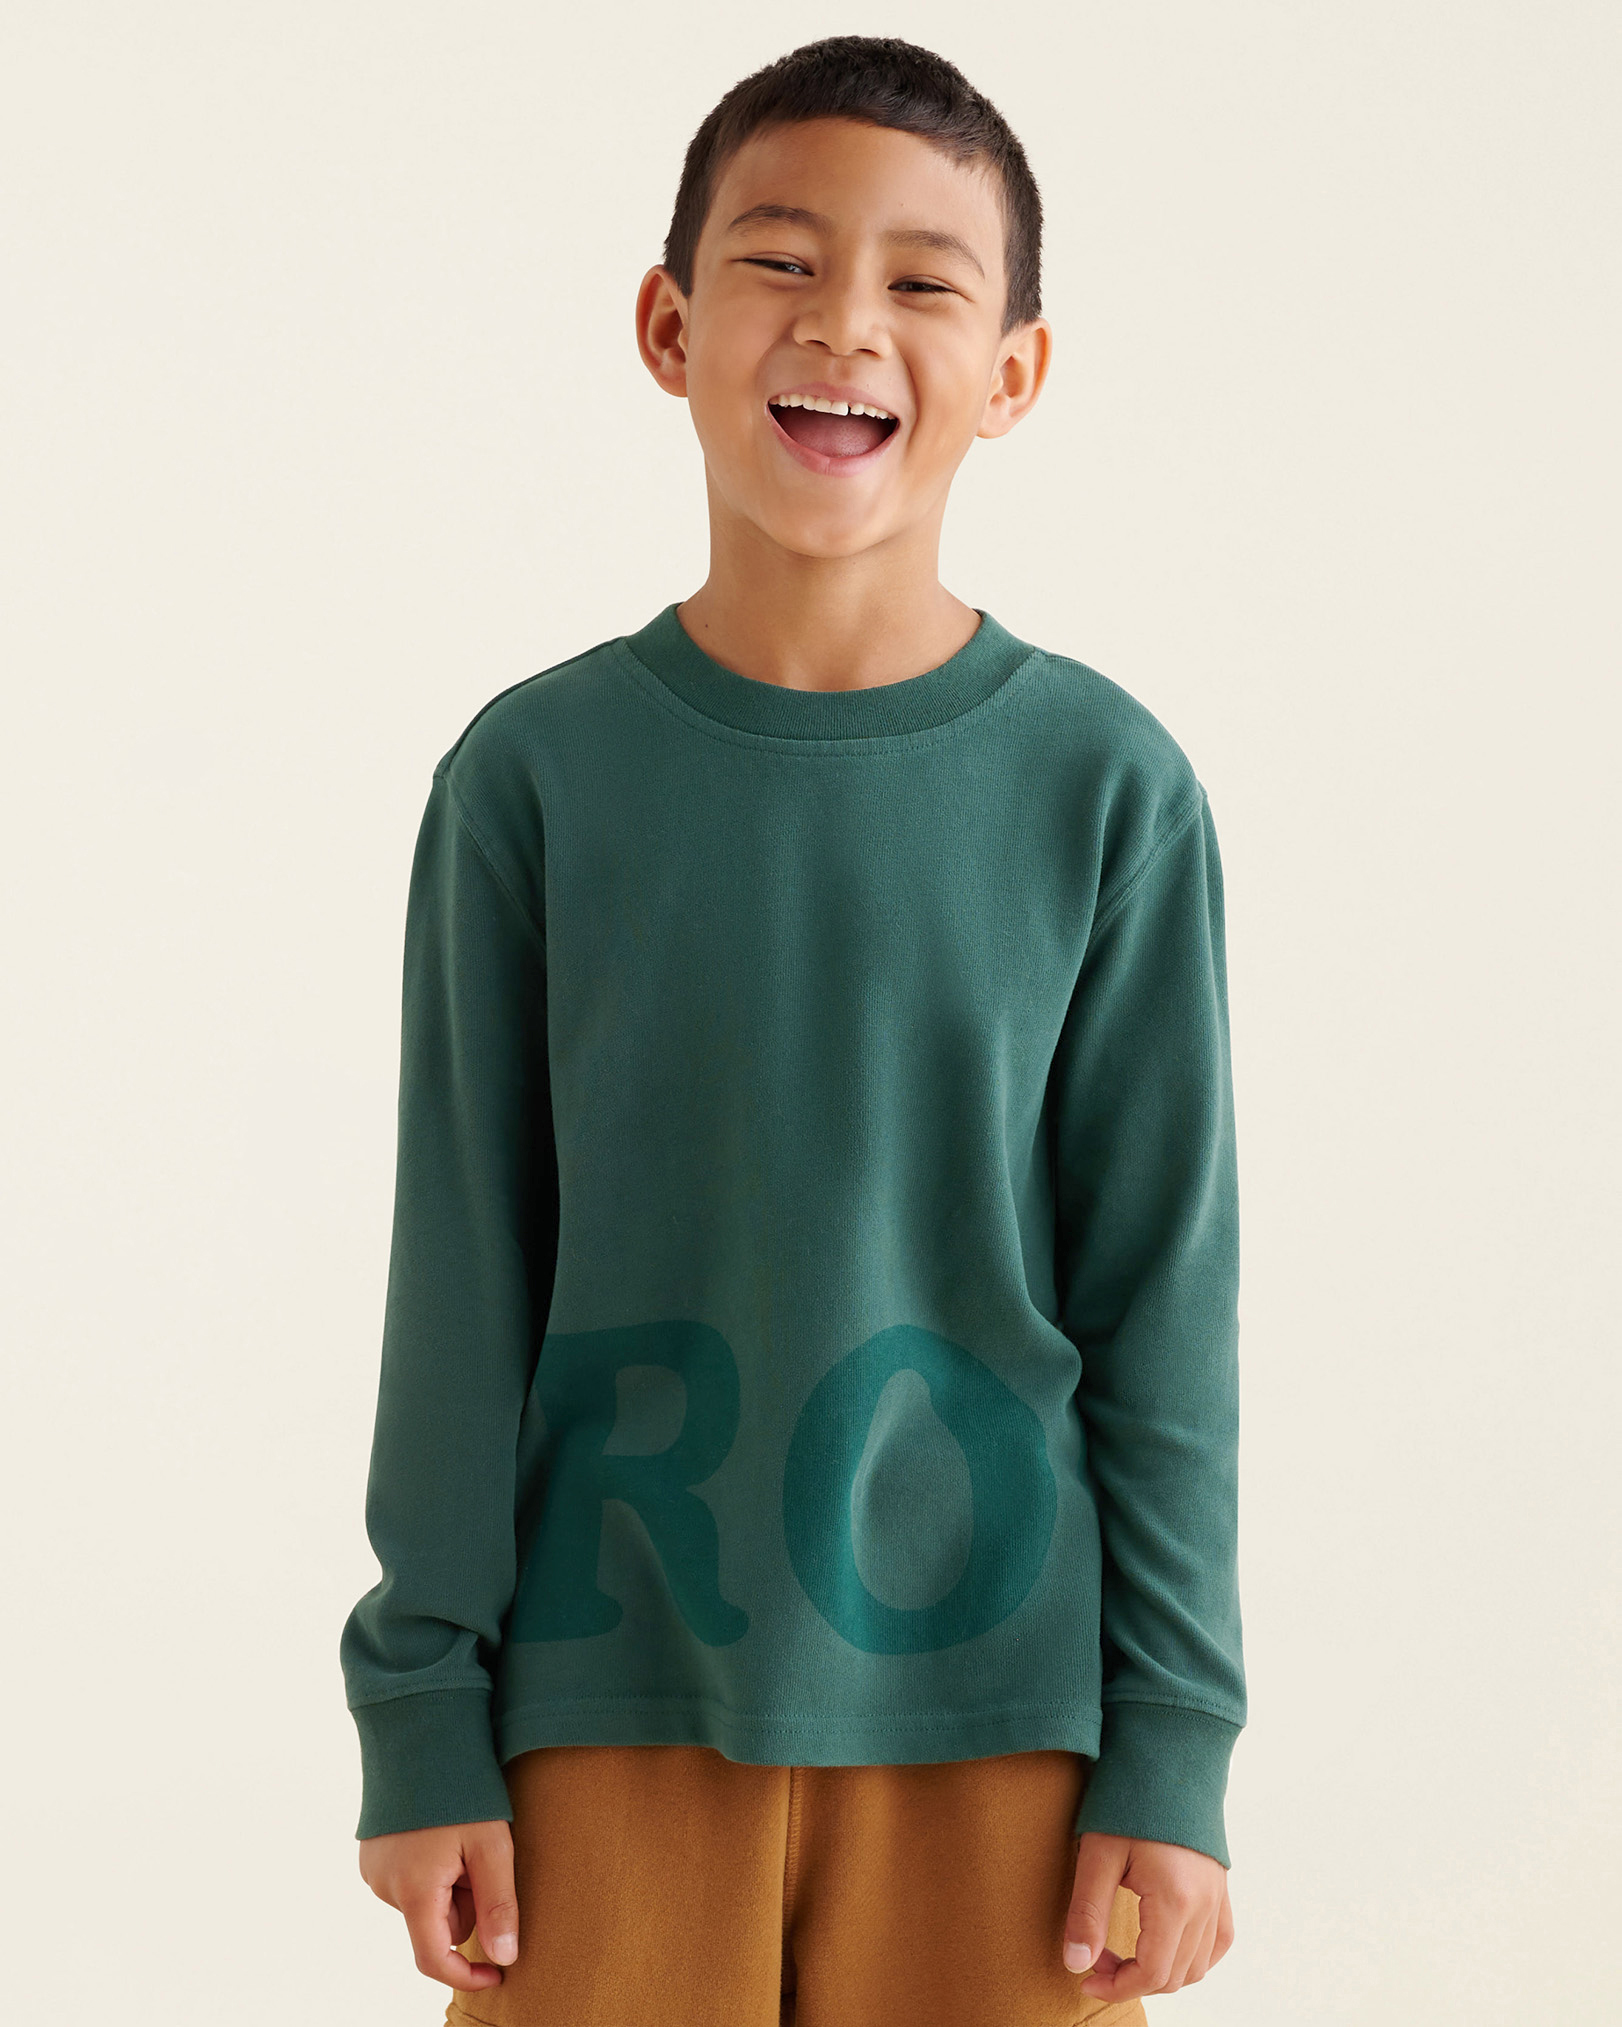 Roots Kids One Long Sleeve T-Shirt in Green Shadow